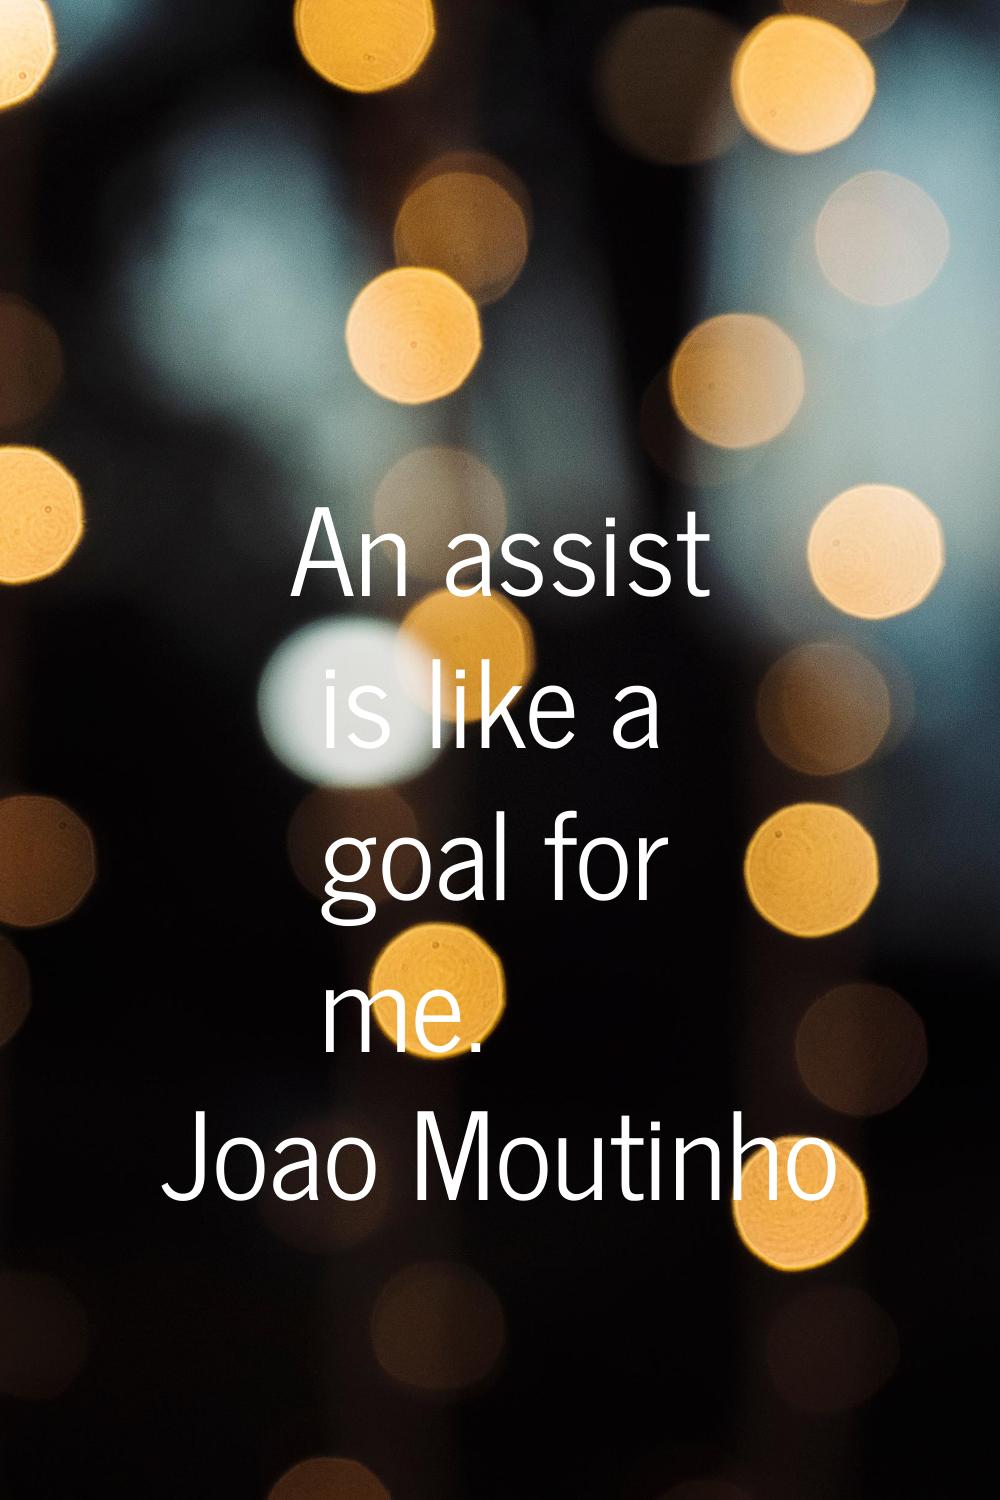 An assist is like a goal for me.